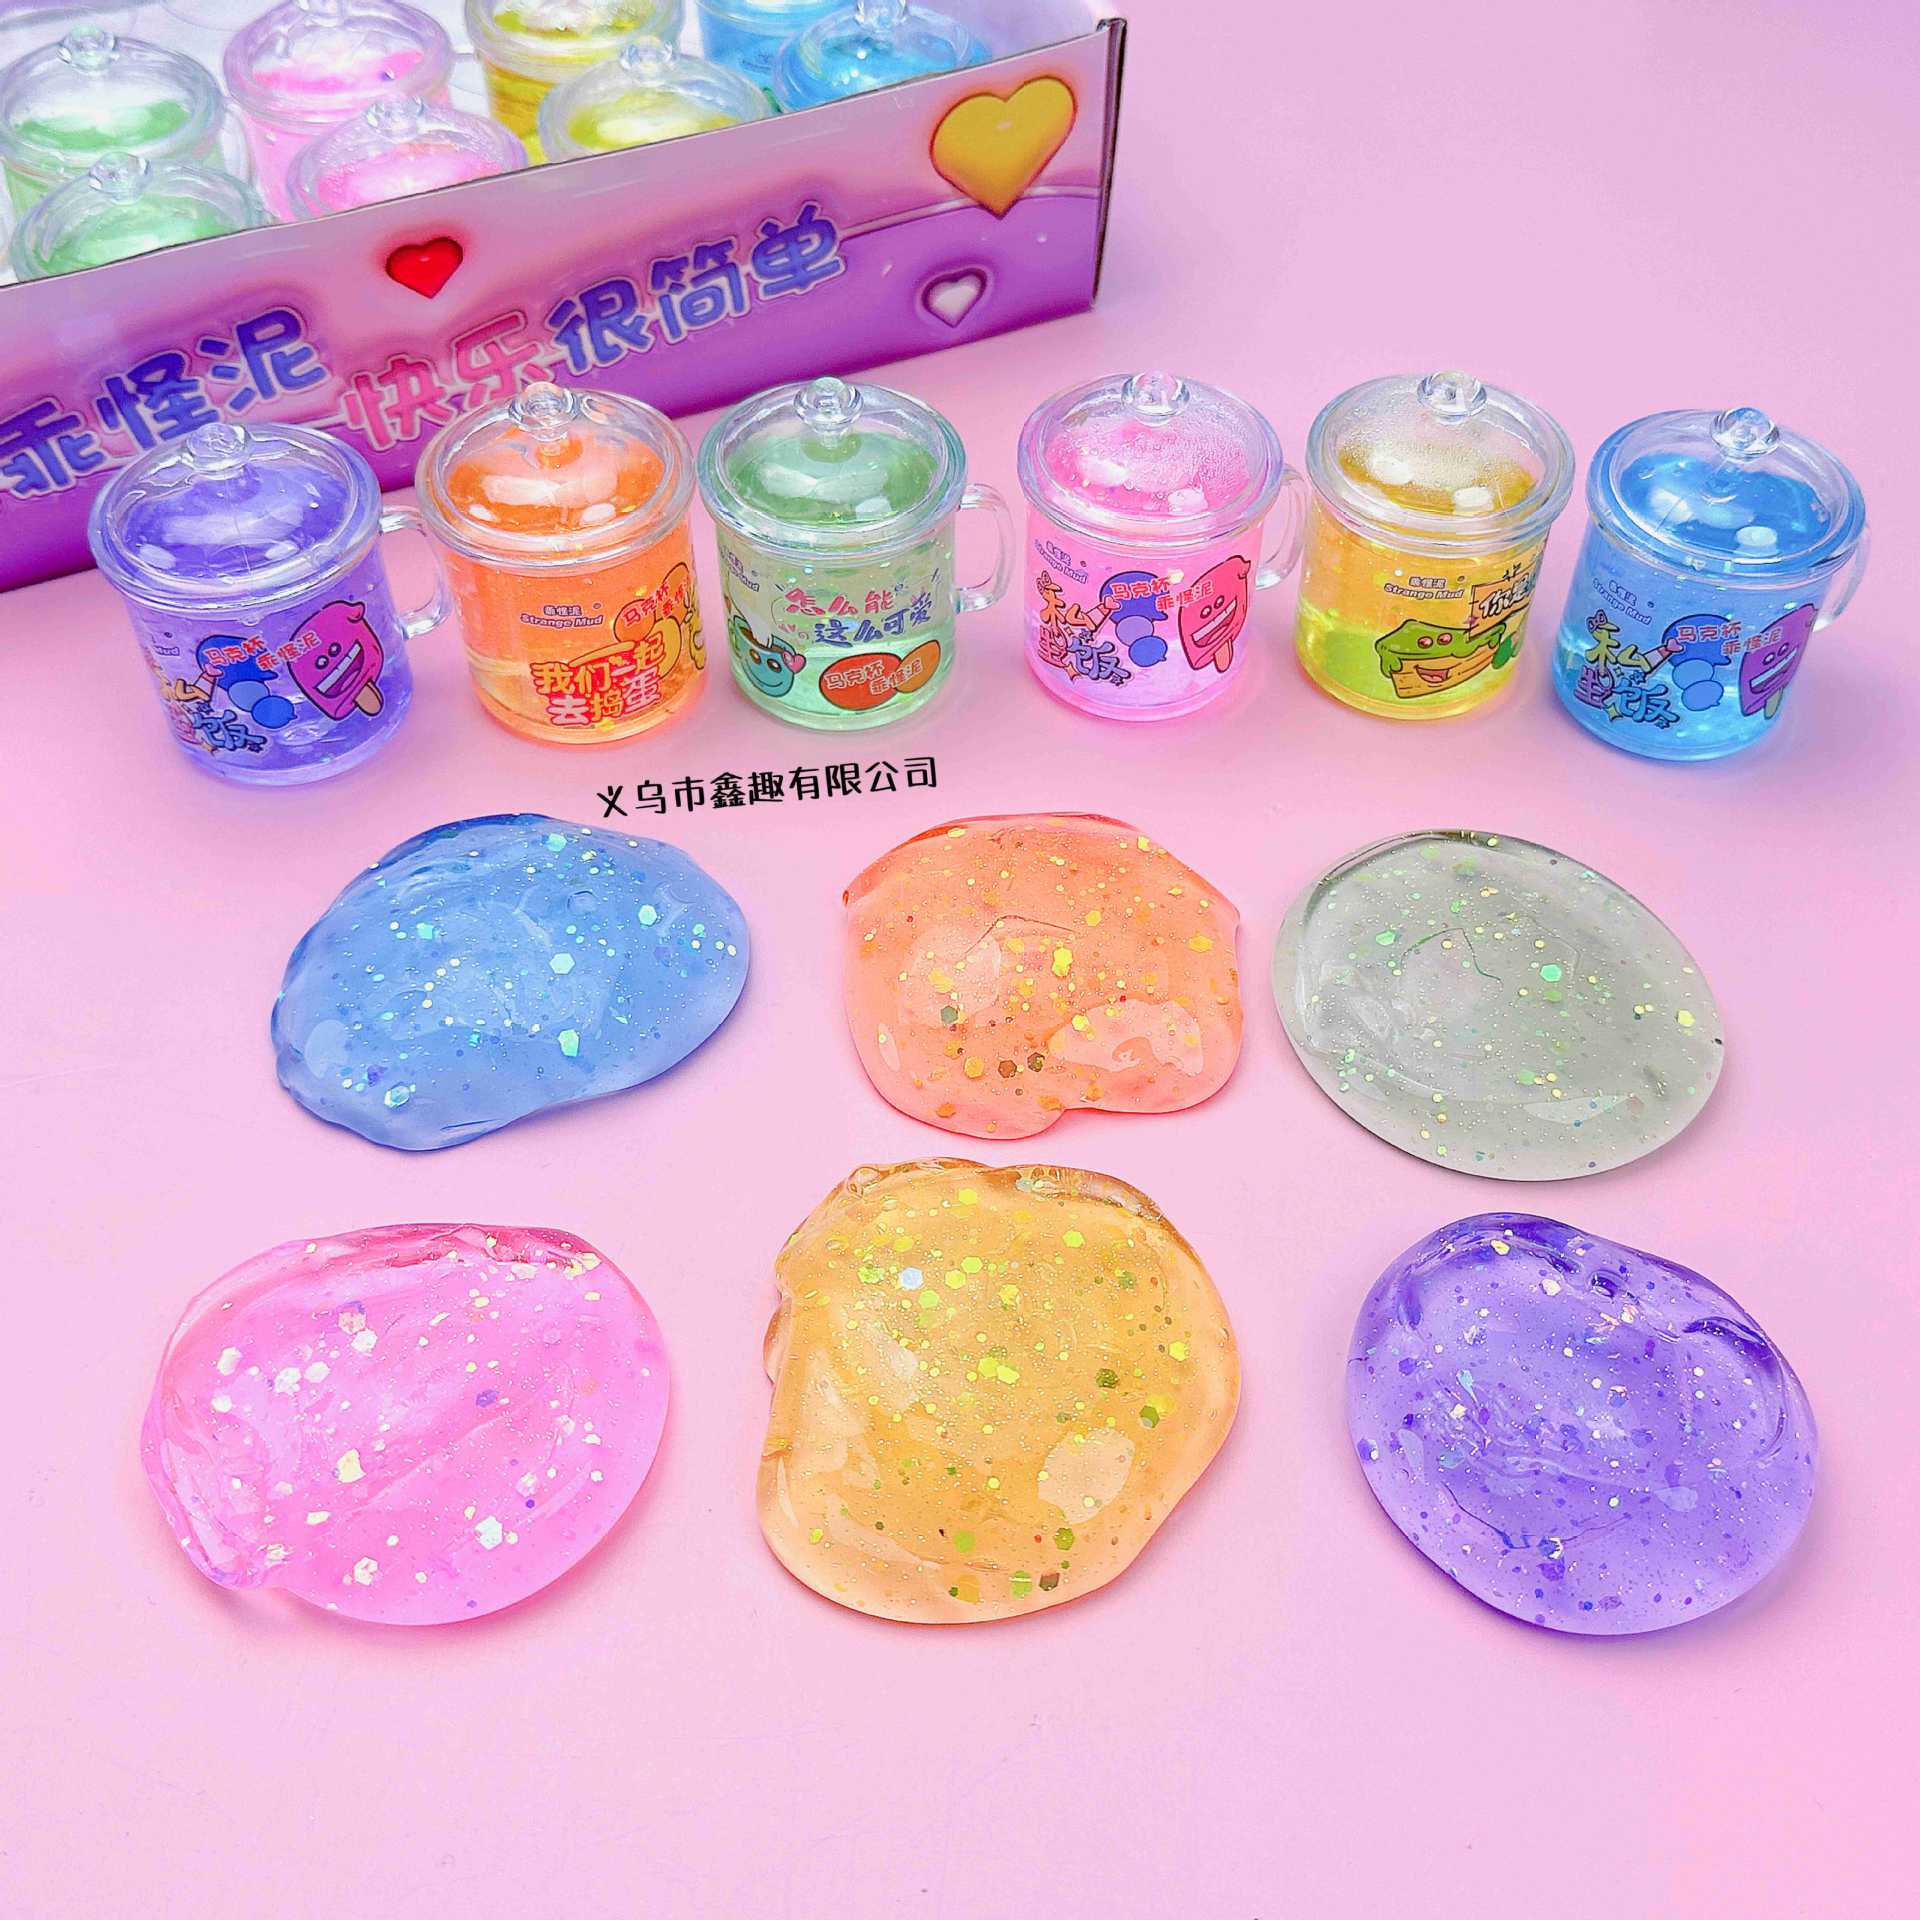 Small Teacup Foaming Glue Slim Douyin Online Influencer Two Yuan Store Crystal Mud Children's Toys Non-Stick Hand Creative Pressure Relief